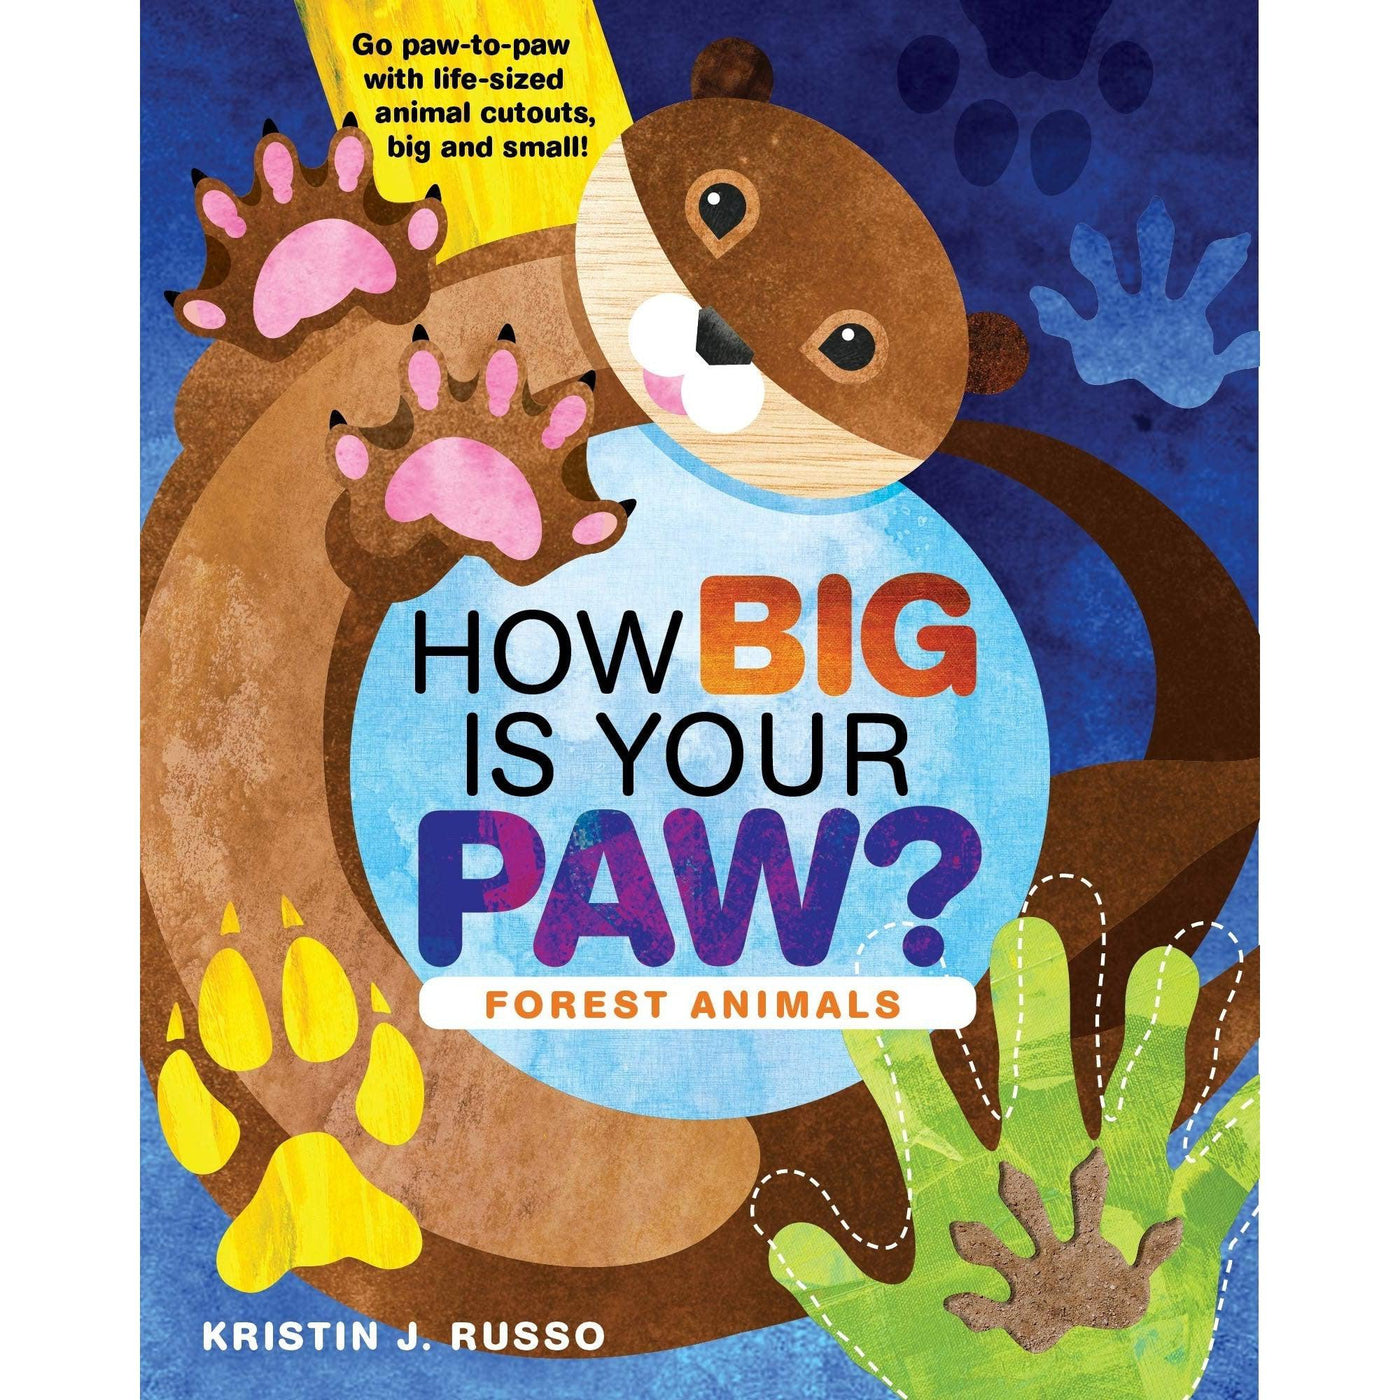 How Big Is Your Paw? Forest Animals: Go Paw-To-Paw With Life-Sized Animal Cutouts Big And Small! - Kristin J. Russo